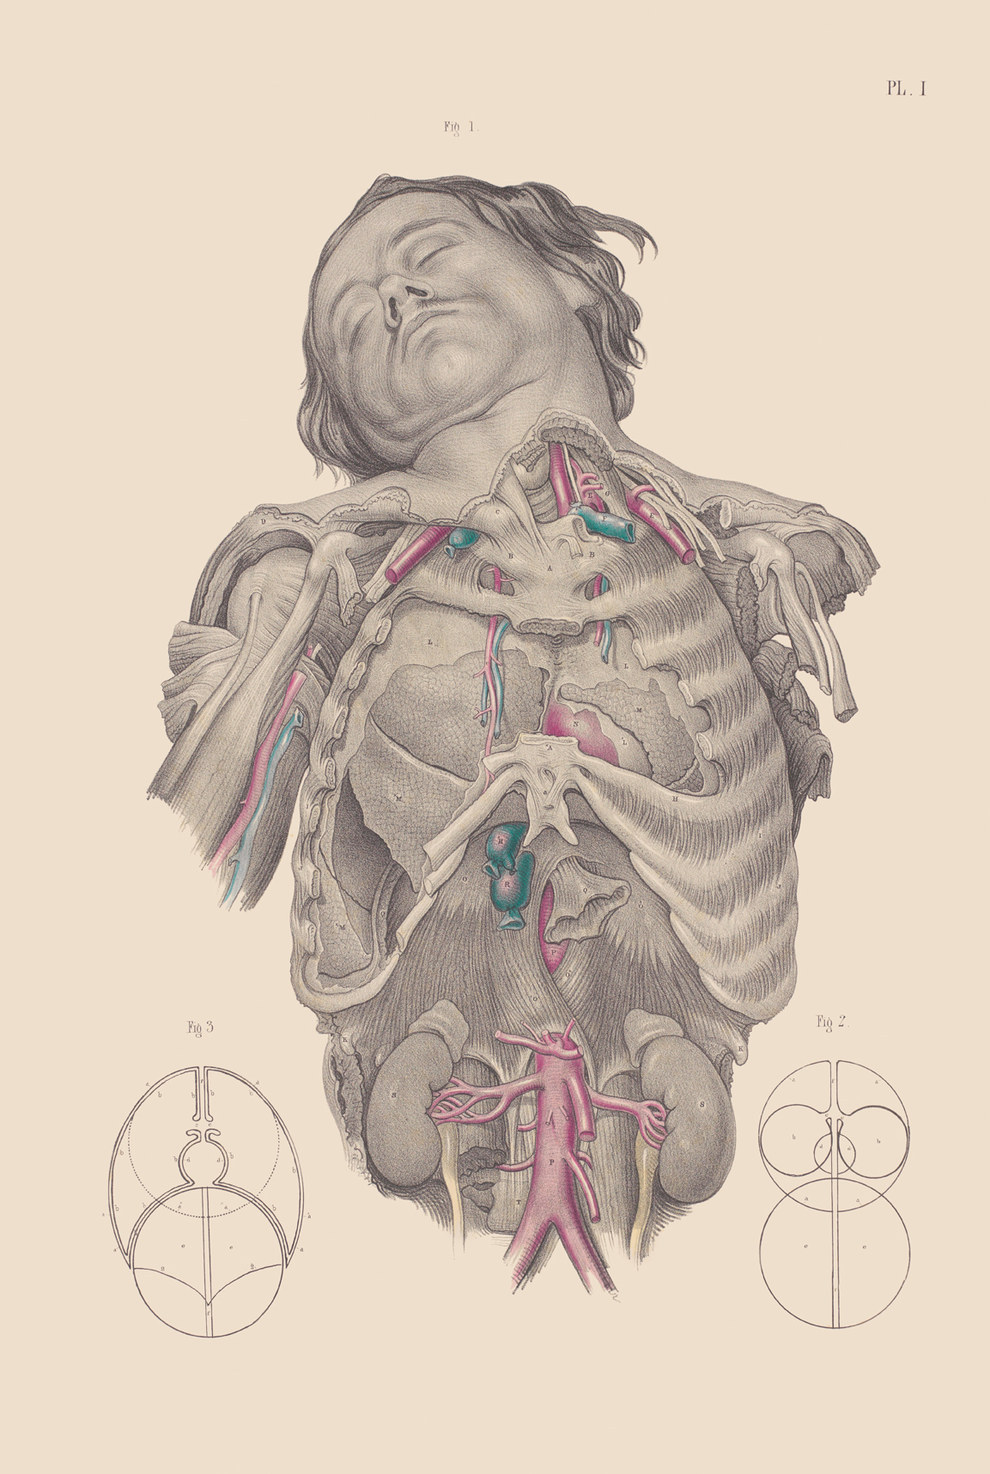 Dissection of the thorax, showing the relative positions of the lungs, heart, and primary blood vessels.